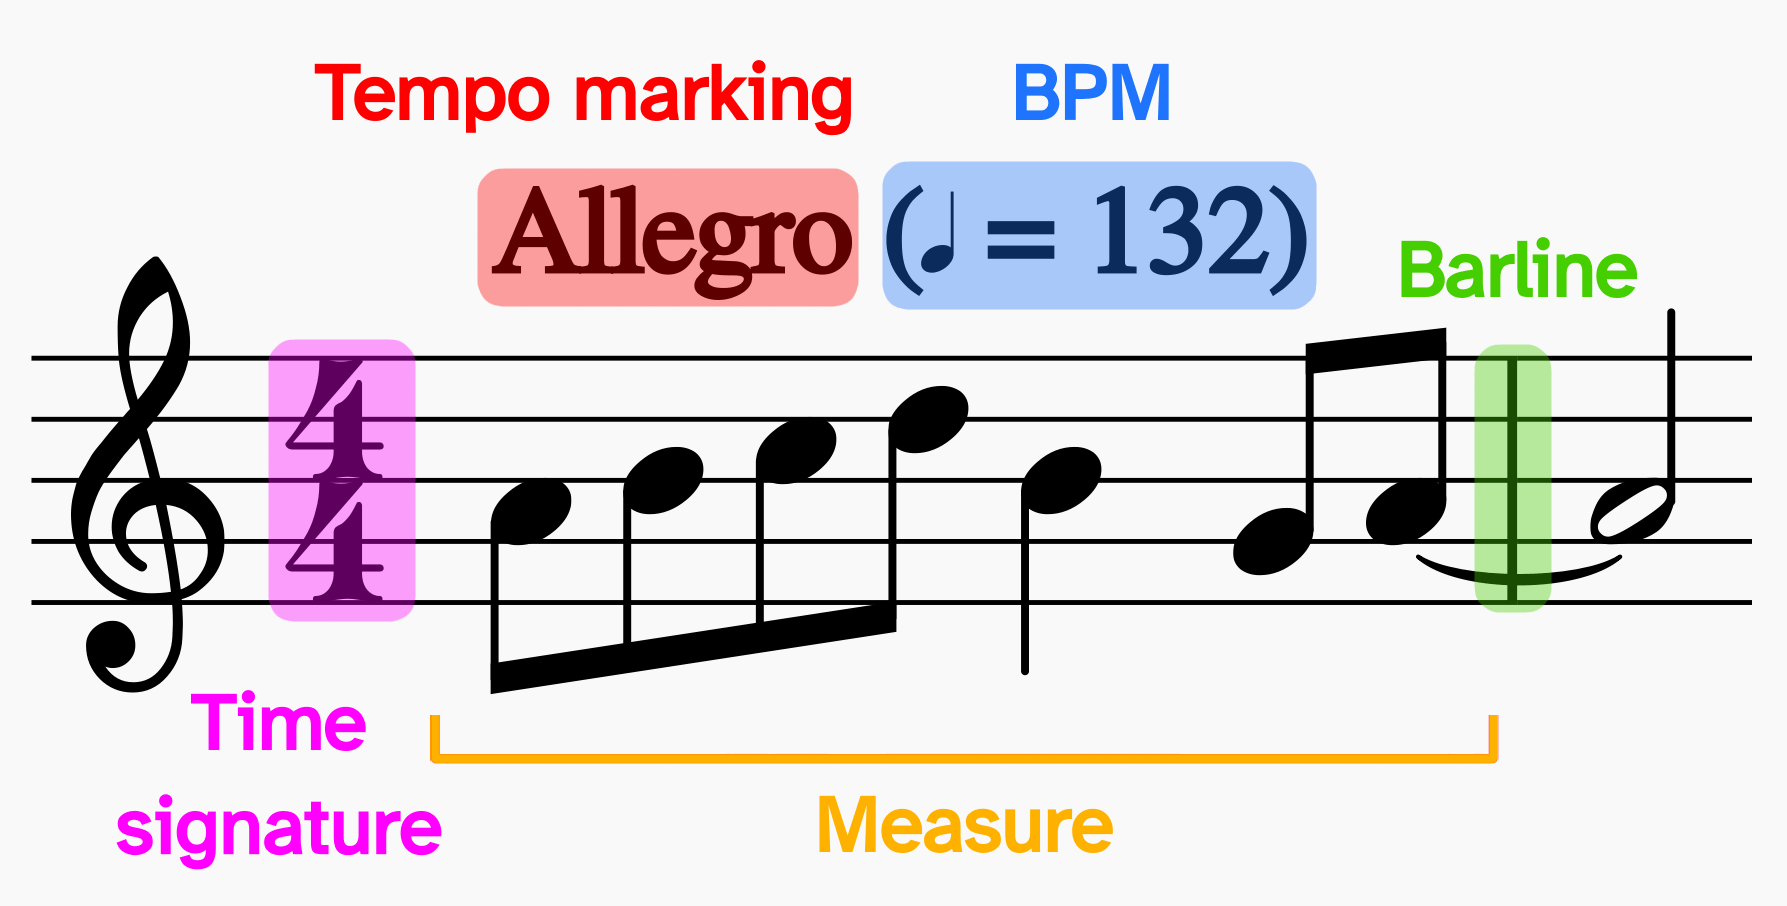 A small piece of sheet music that highlights important aspects of the staff. These are the tempo marking, the tempo in beats per minute, the time signature, a single measure, and a barline.